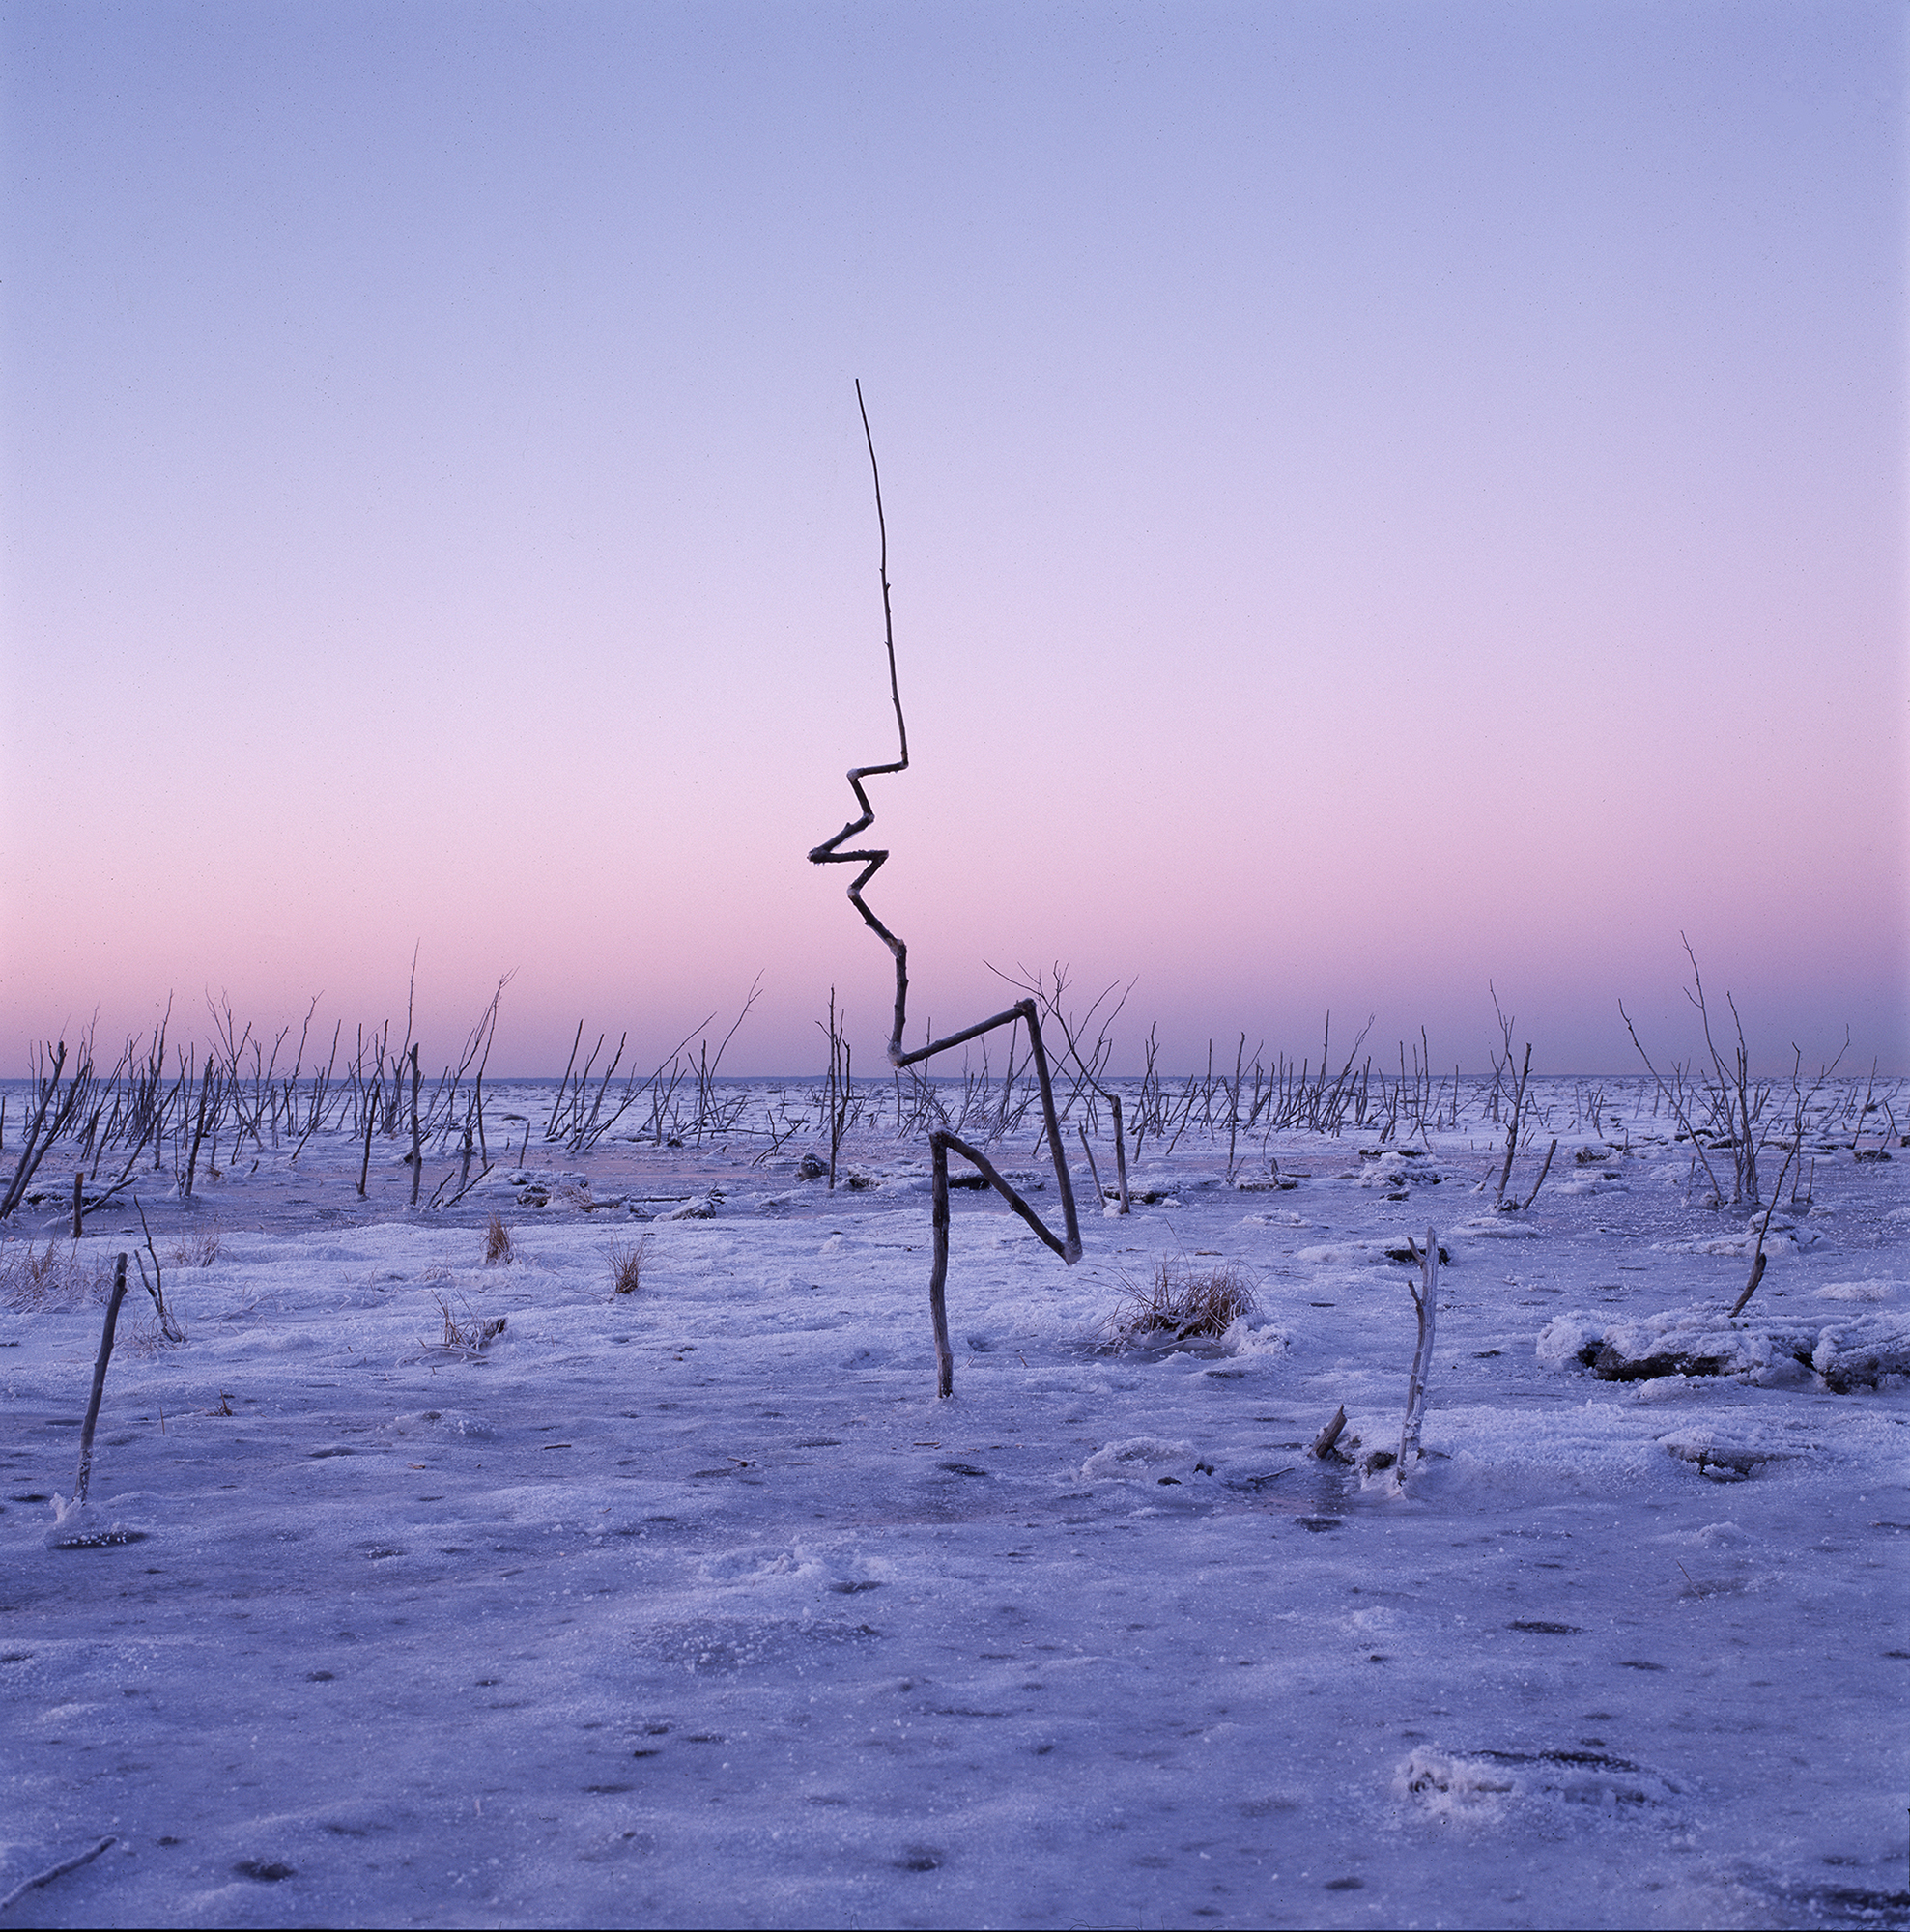 Contaminated Landscape  Twelve sticks each stick frozen to another took all day easier to work before sunrise and after sunset Anchorage, 29 November 1995
Unique framed cibachrome print with framed text/photo
33.5 x 32.5 x 2 inches (85.09 x 82.55 x 5.08 cm) 2022 Marc Straus Gallery